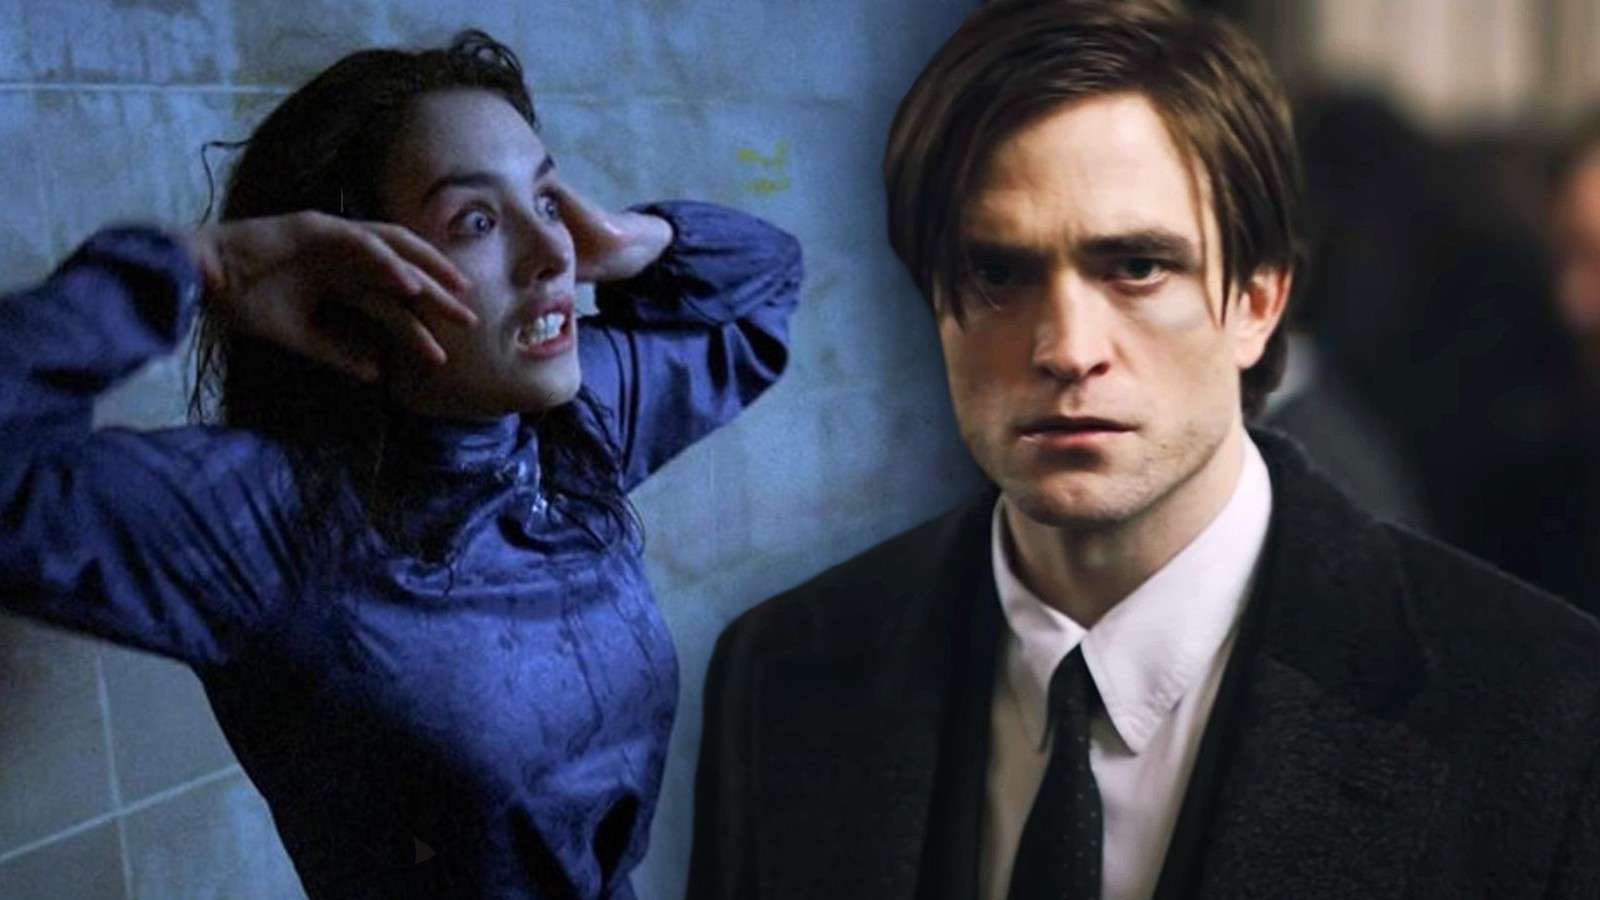 Isabelle Adjani in Possession and Robert Pattinson in The Batman